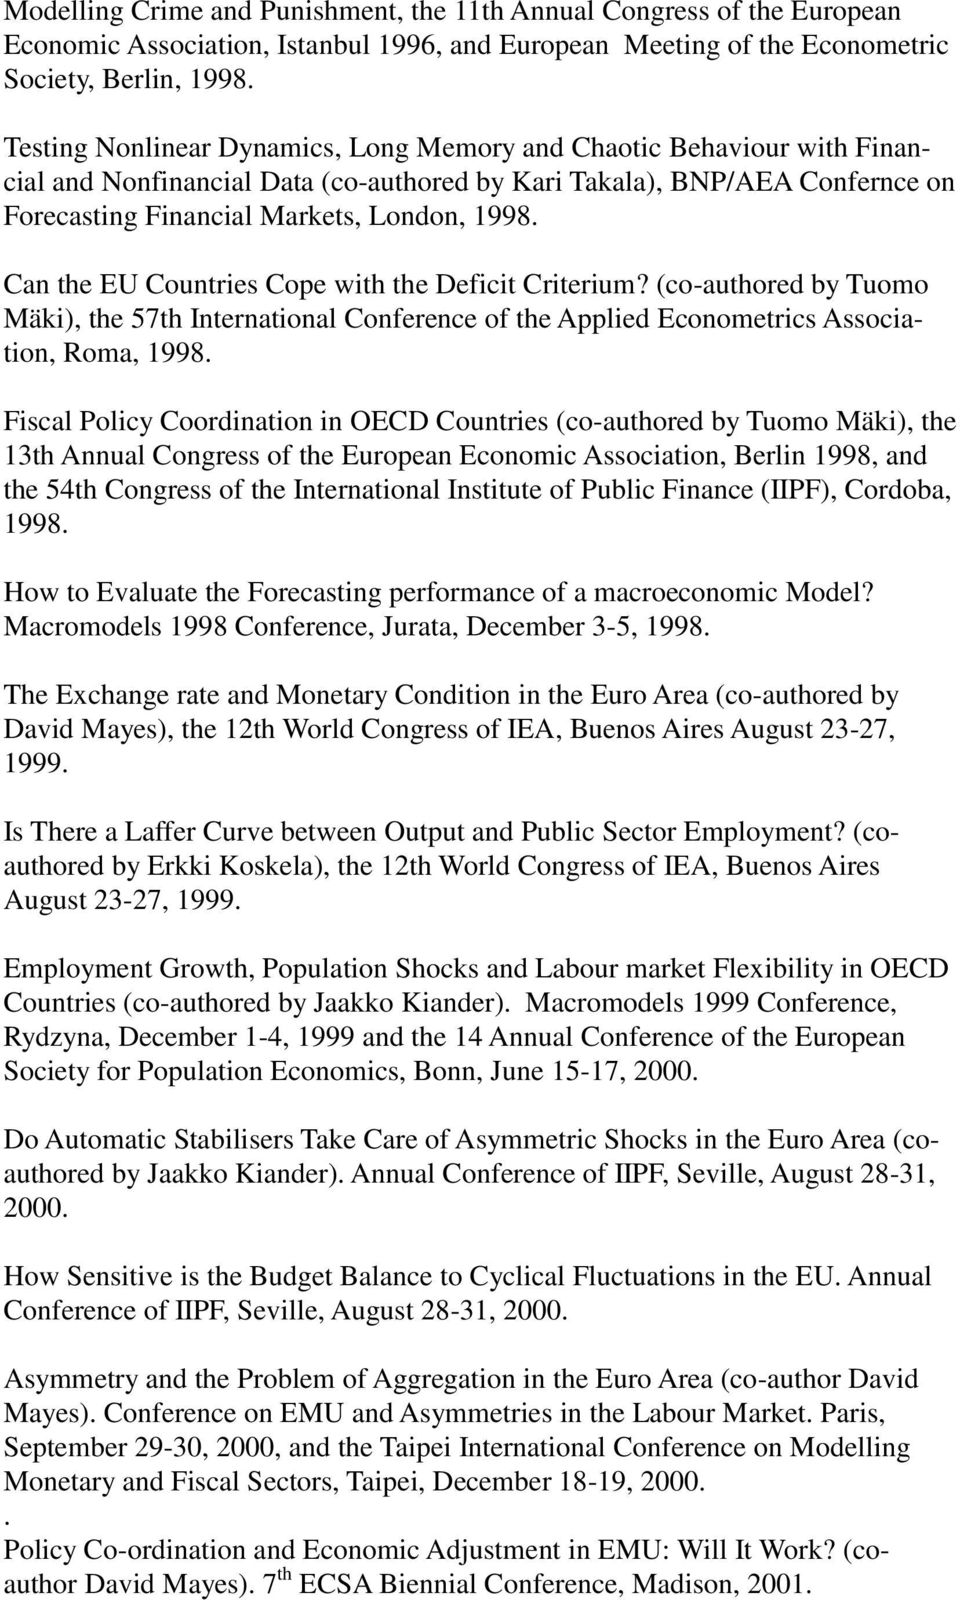 Can the EU Countries Cope with the Deficit Criterium? (co-authored by Tuomo Mäki), the 57th International Conference of the Applied Econometrics Association, Roma, 1998.